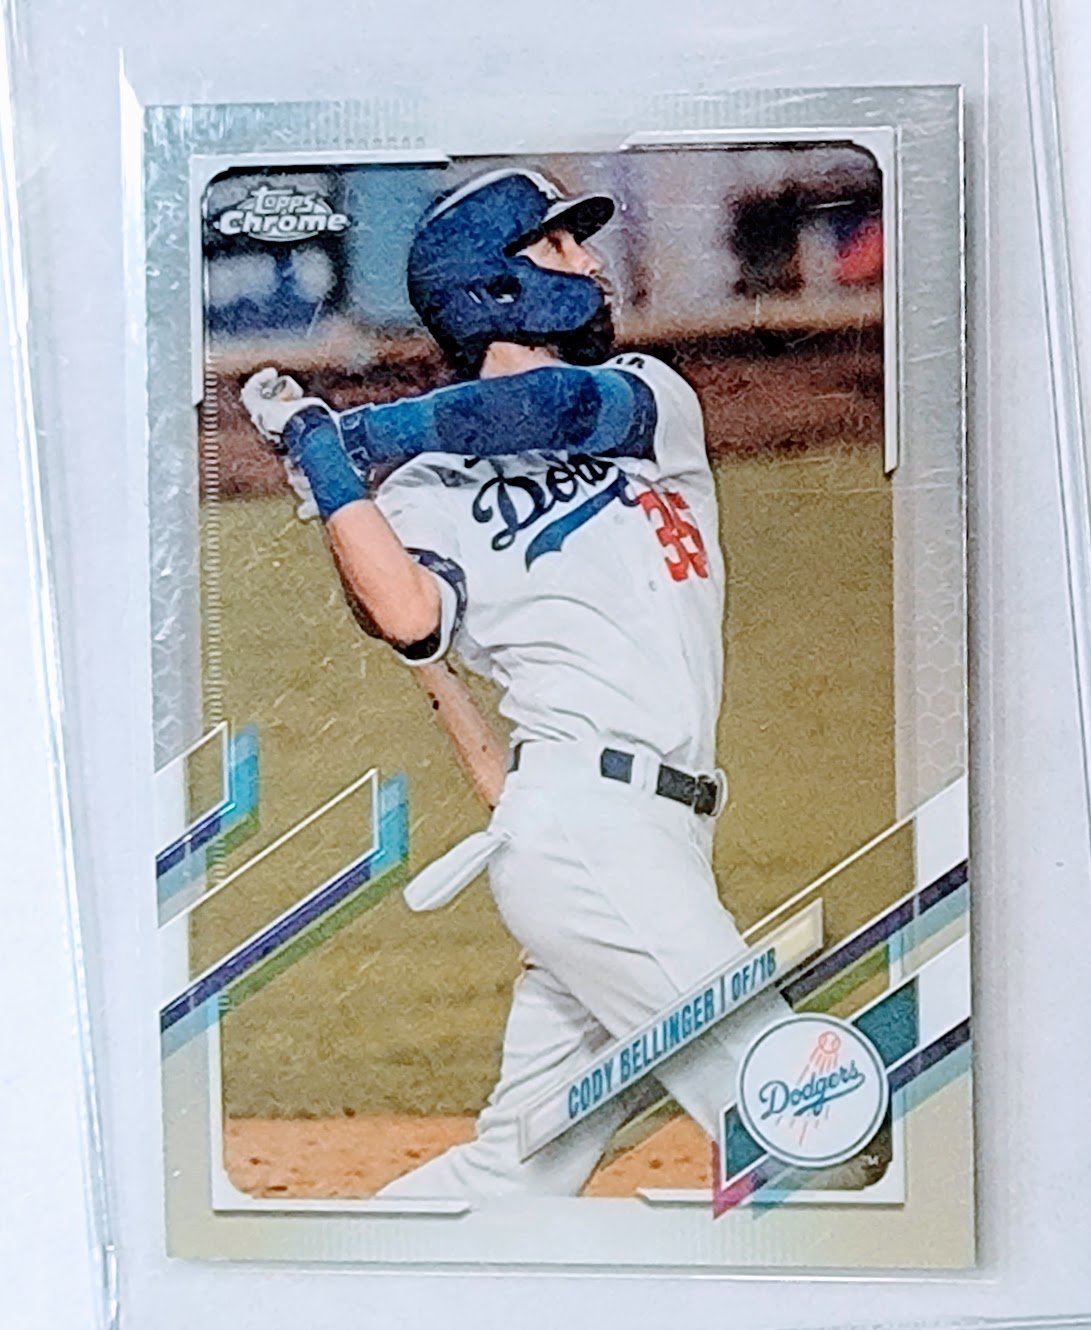 2020 Topps Chrome Cody Bellinger Baseball Card TPTV simple Xclusive Collectibles   